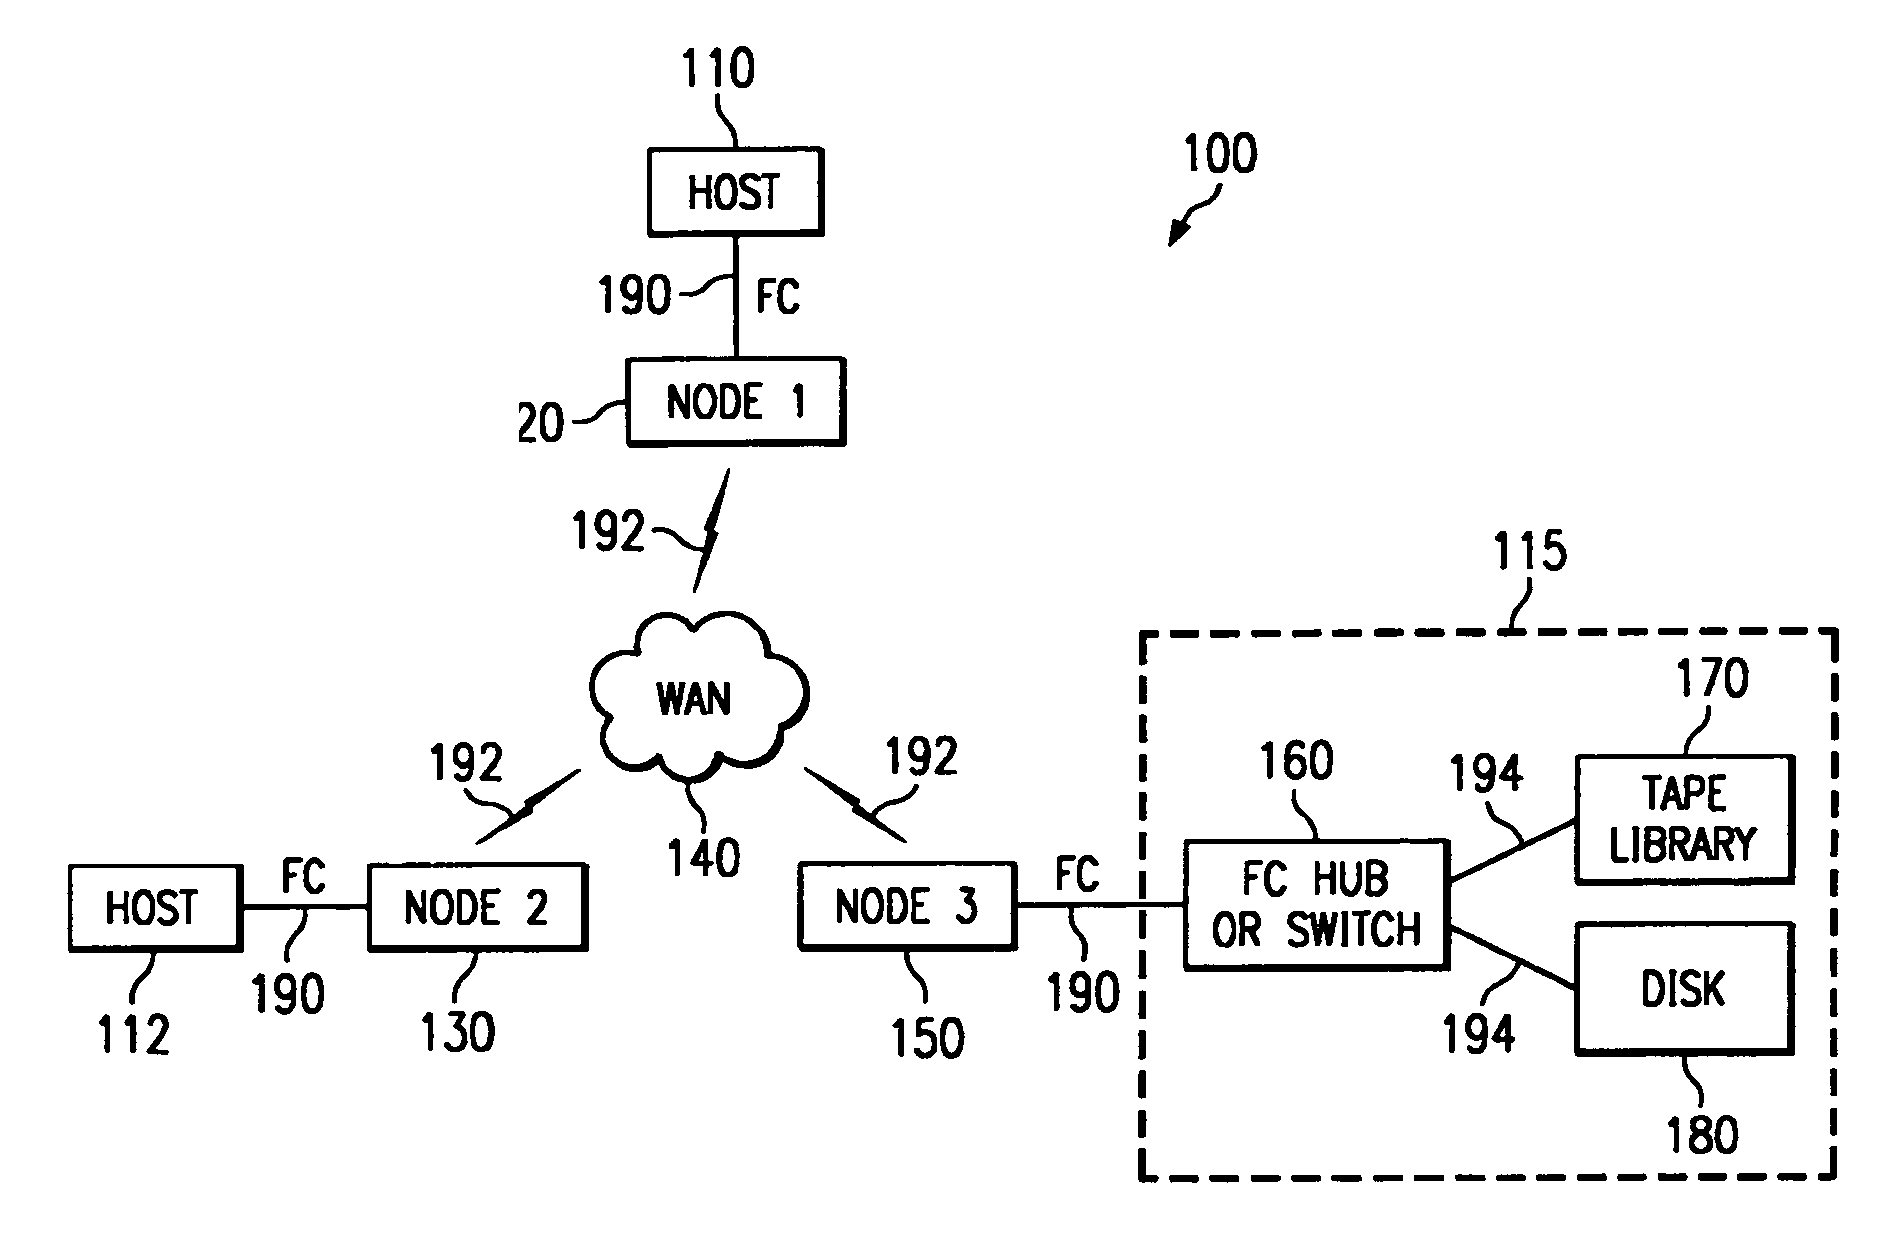 Encapsulation protocol for linking storage area networks over a packet-based network